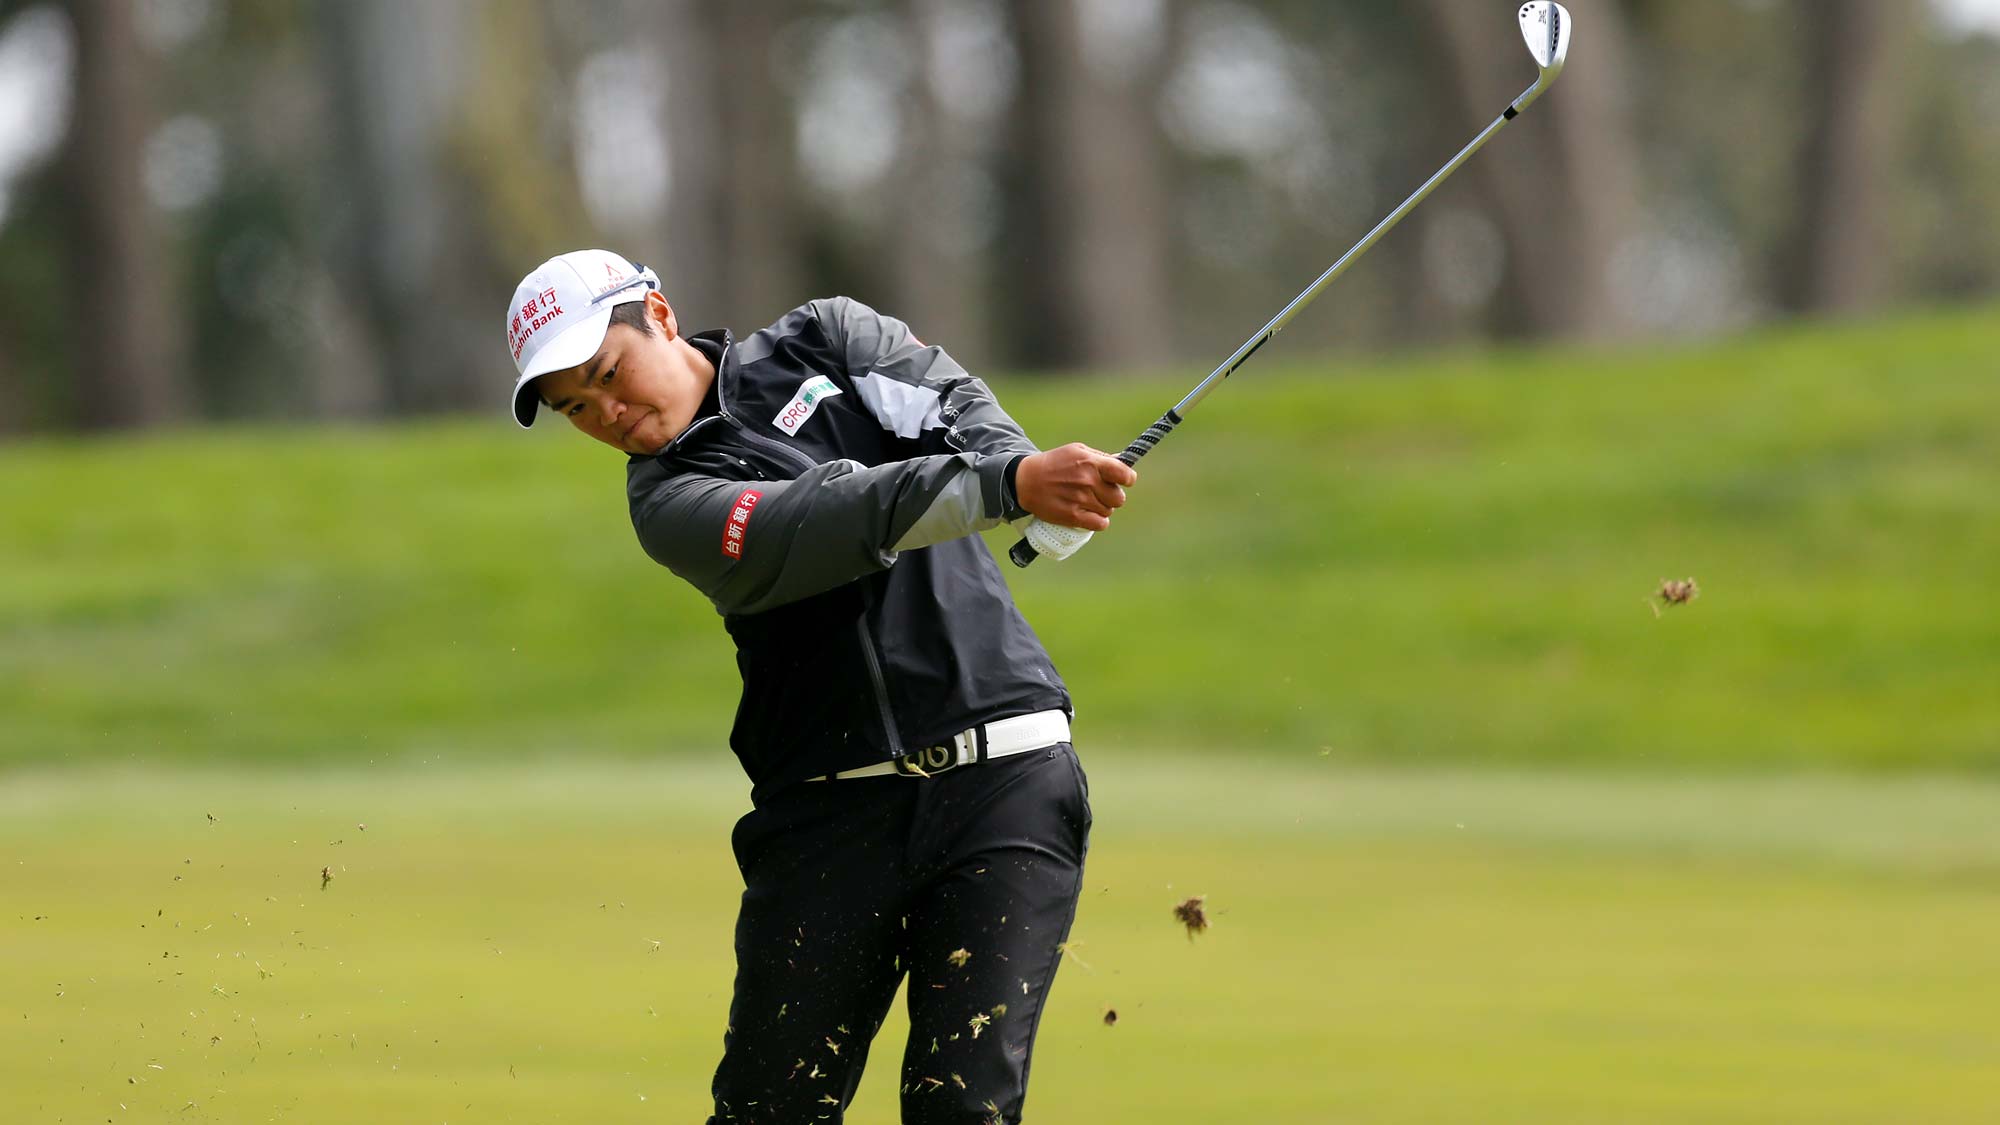 Peiyun Chien of China hits on the 11th hole during the third round of the LPGA Mediheal Championship